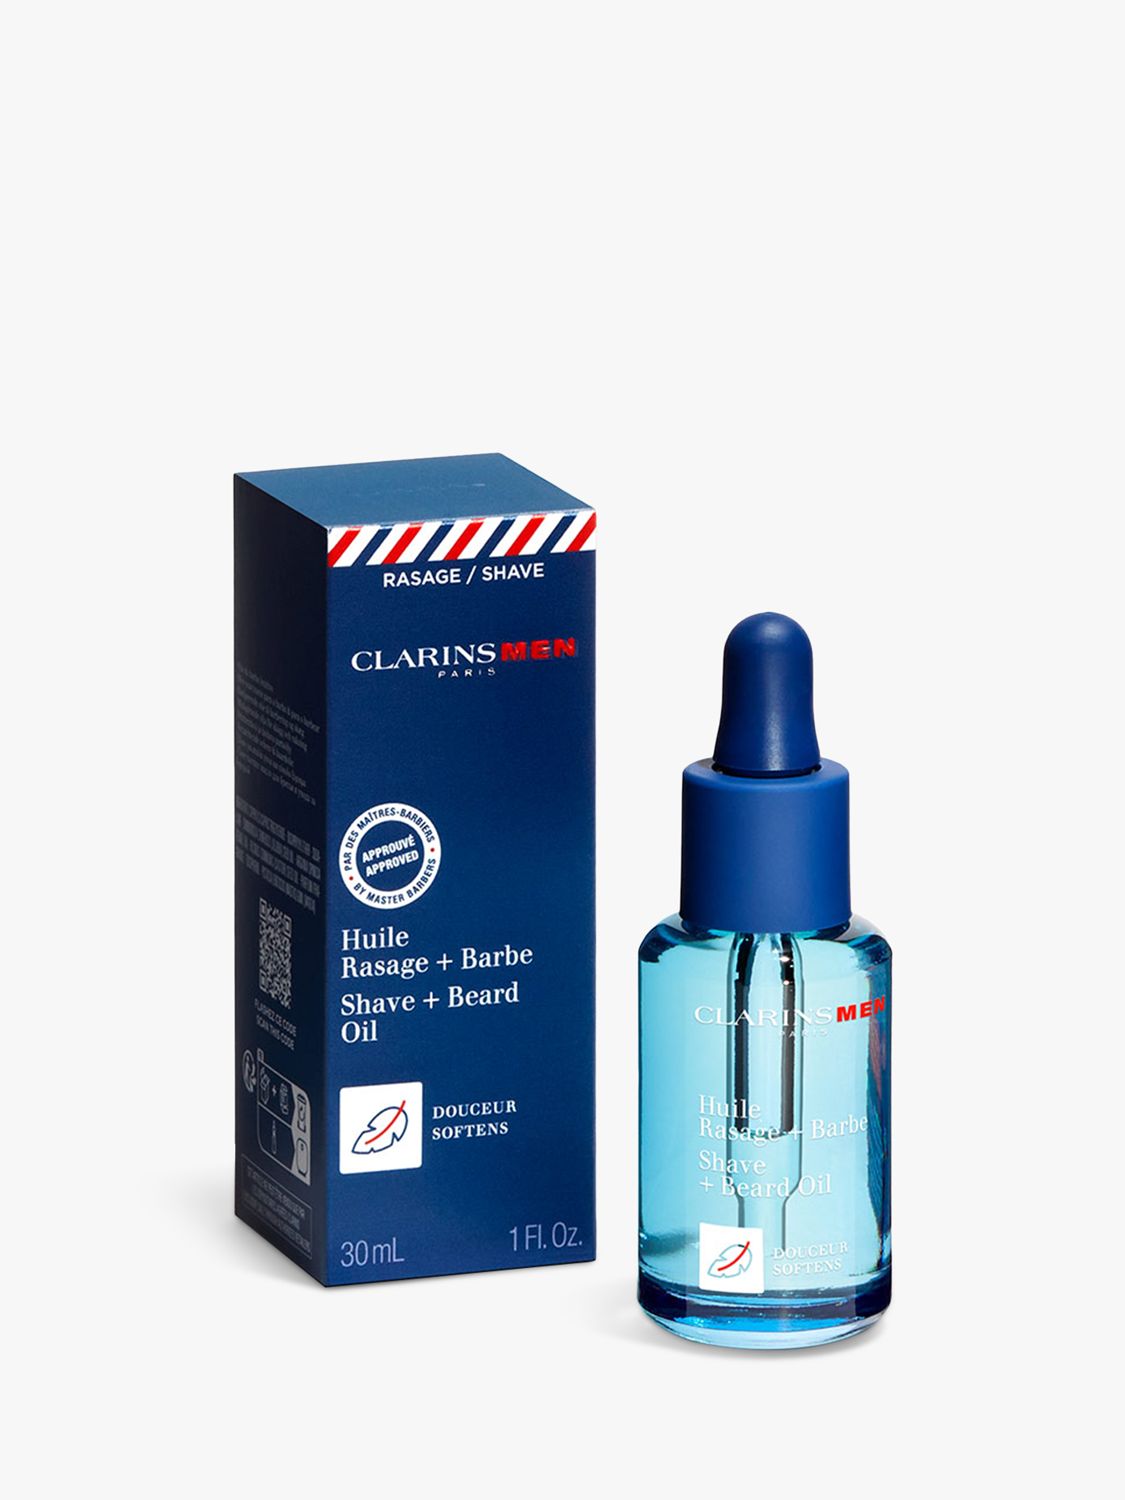 ClarinsMen Shave and Beard Oil, 30ml